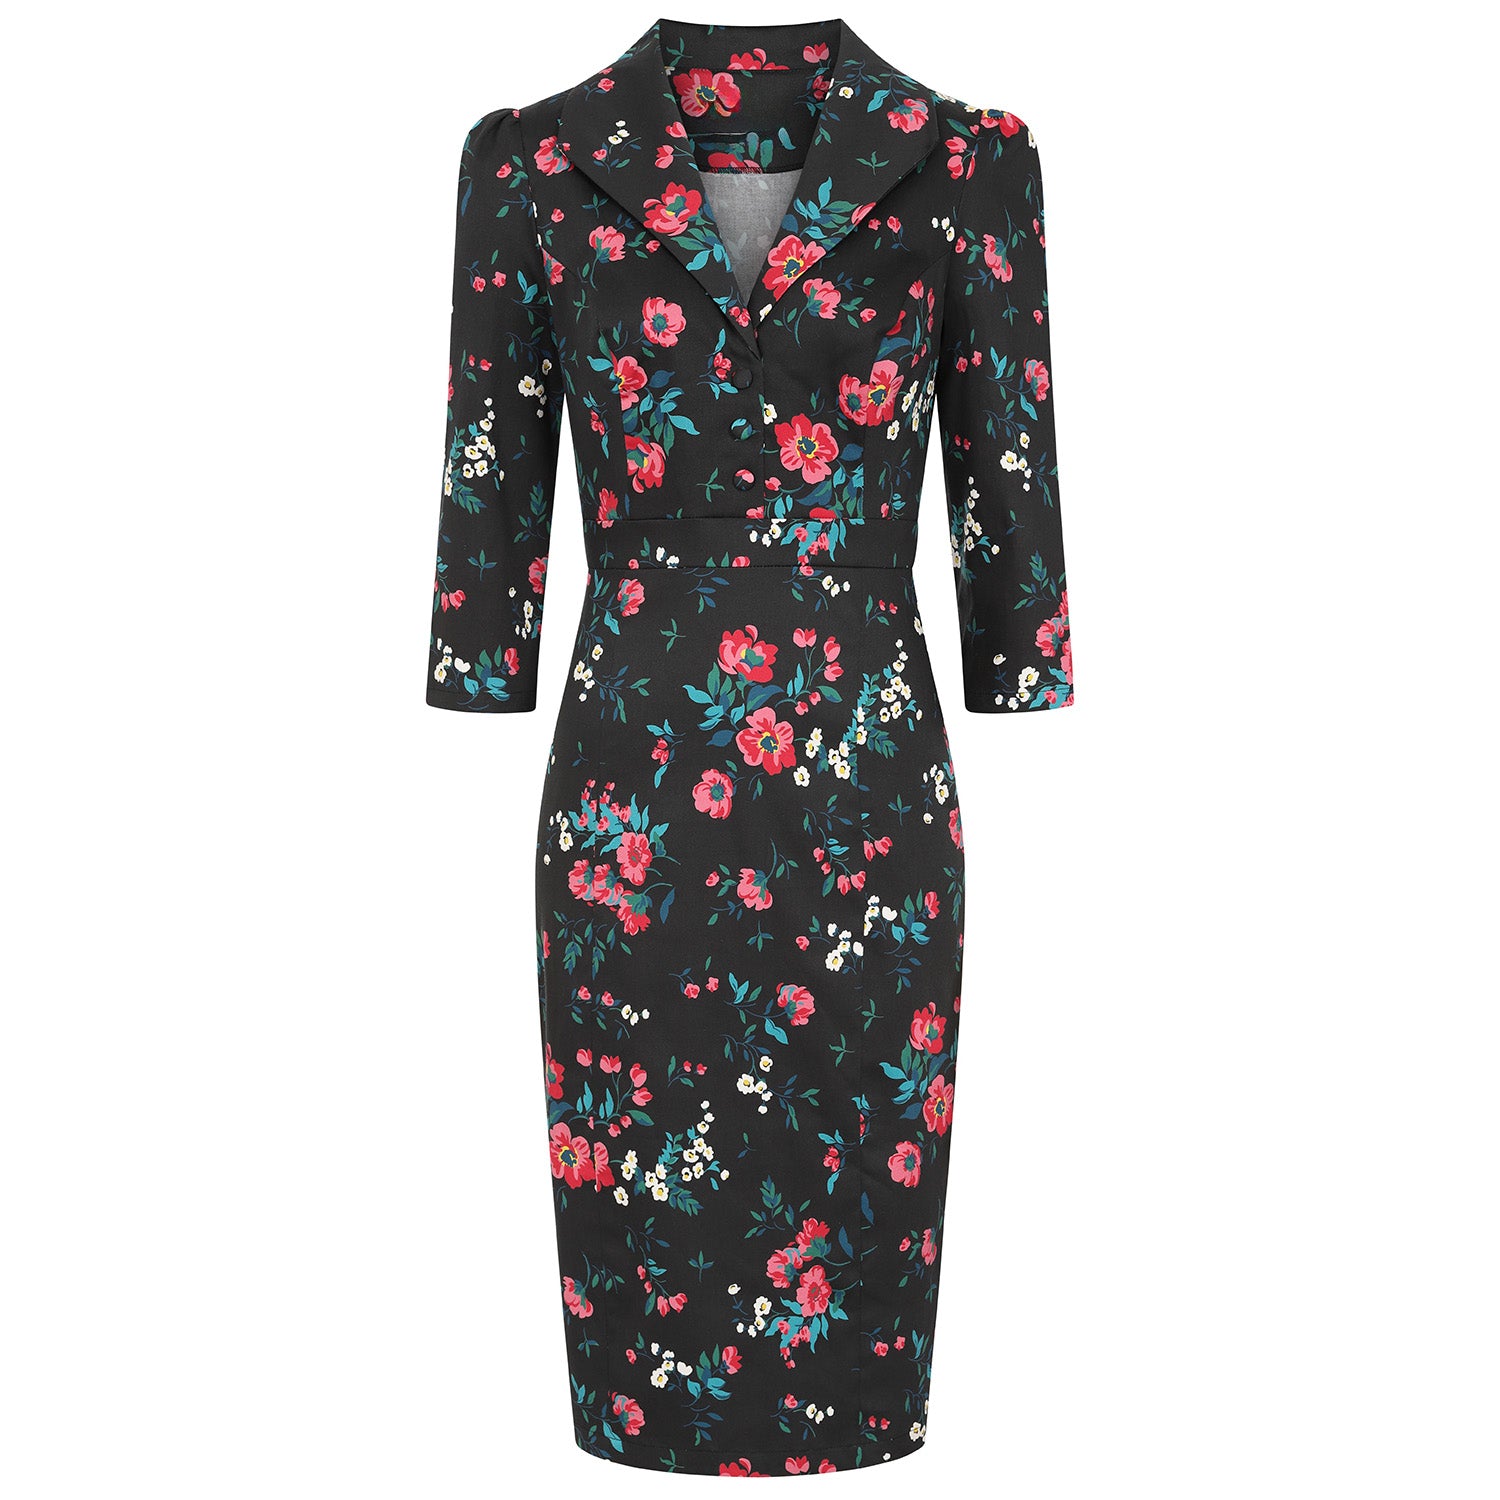 Black Collared Wiggle Dress in a Pink, White & Green Floral Print